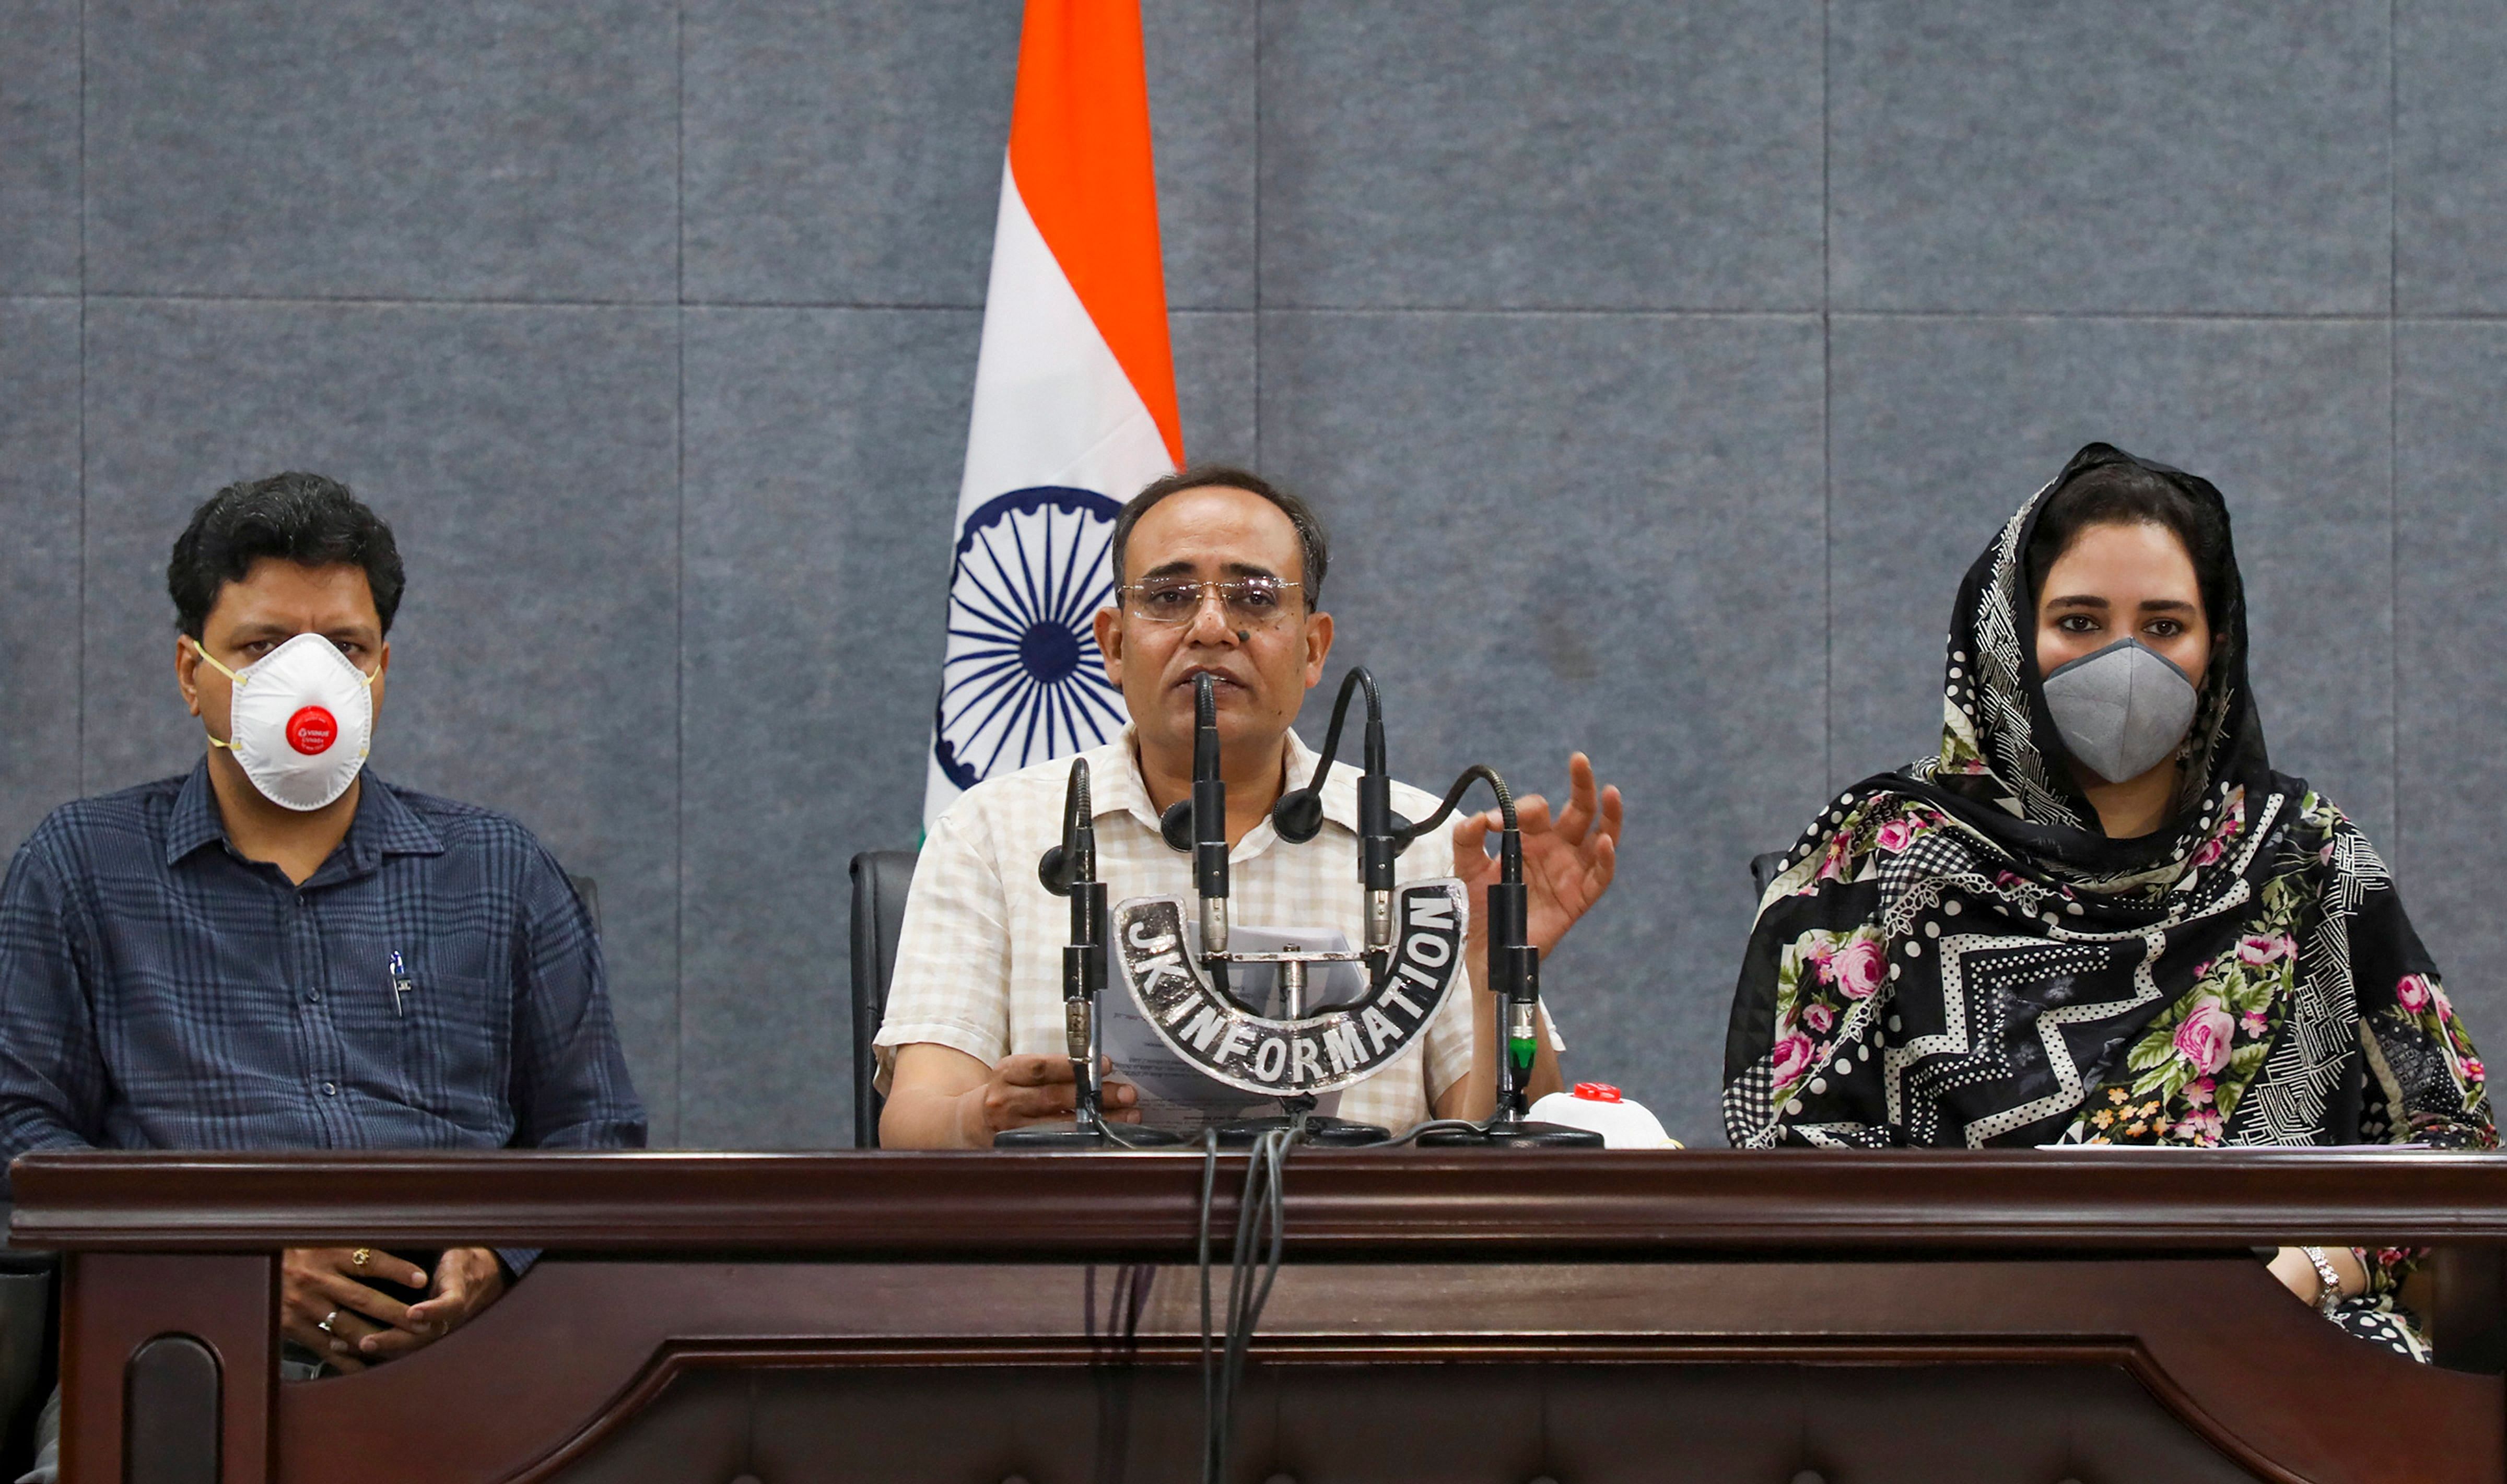 J&K Principal Secretary Planning and Information Rohit Kansal (C) addresses a press conference at Directorate of Information auditorium regarding the situation of coronavirus in UT, in Jammu, Monday, May 25, 2020. (PTI photo)